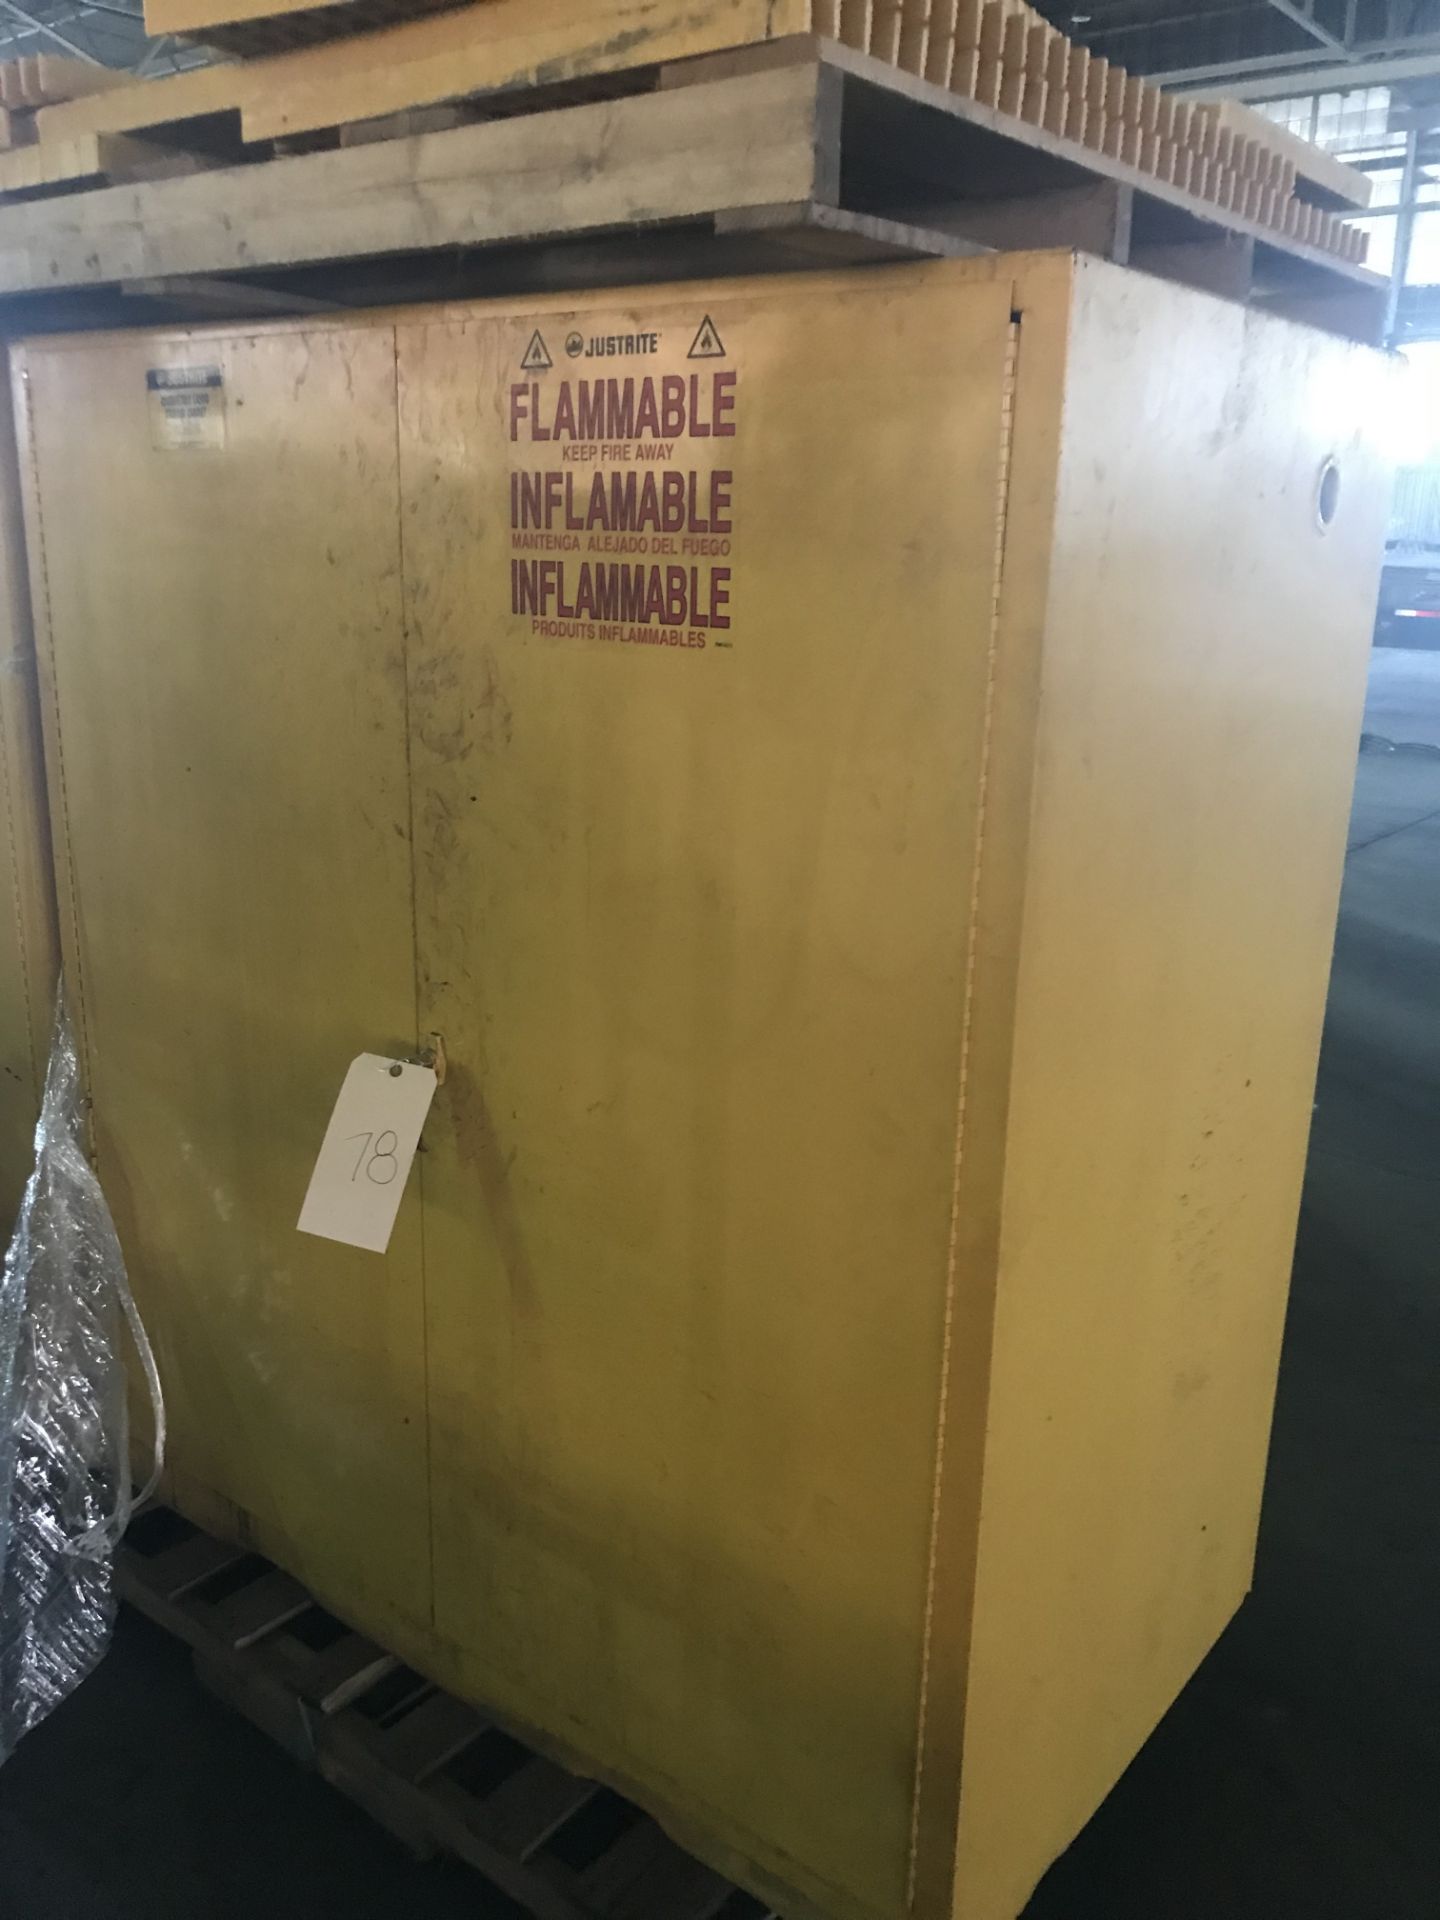 JustRite Flammable Cabinet, 66" Wide x 60" H x 34" Depth, Model: 25760, Capacity (2) 55 Gal.